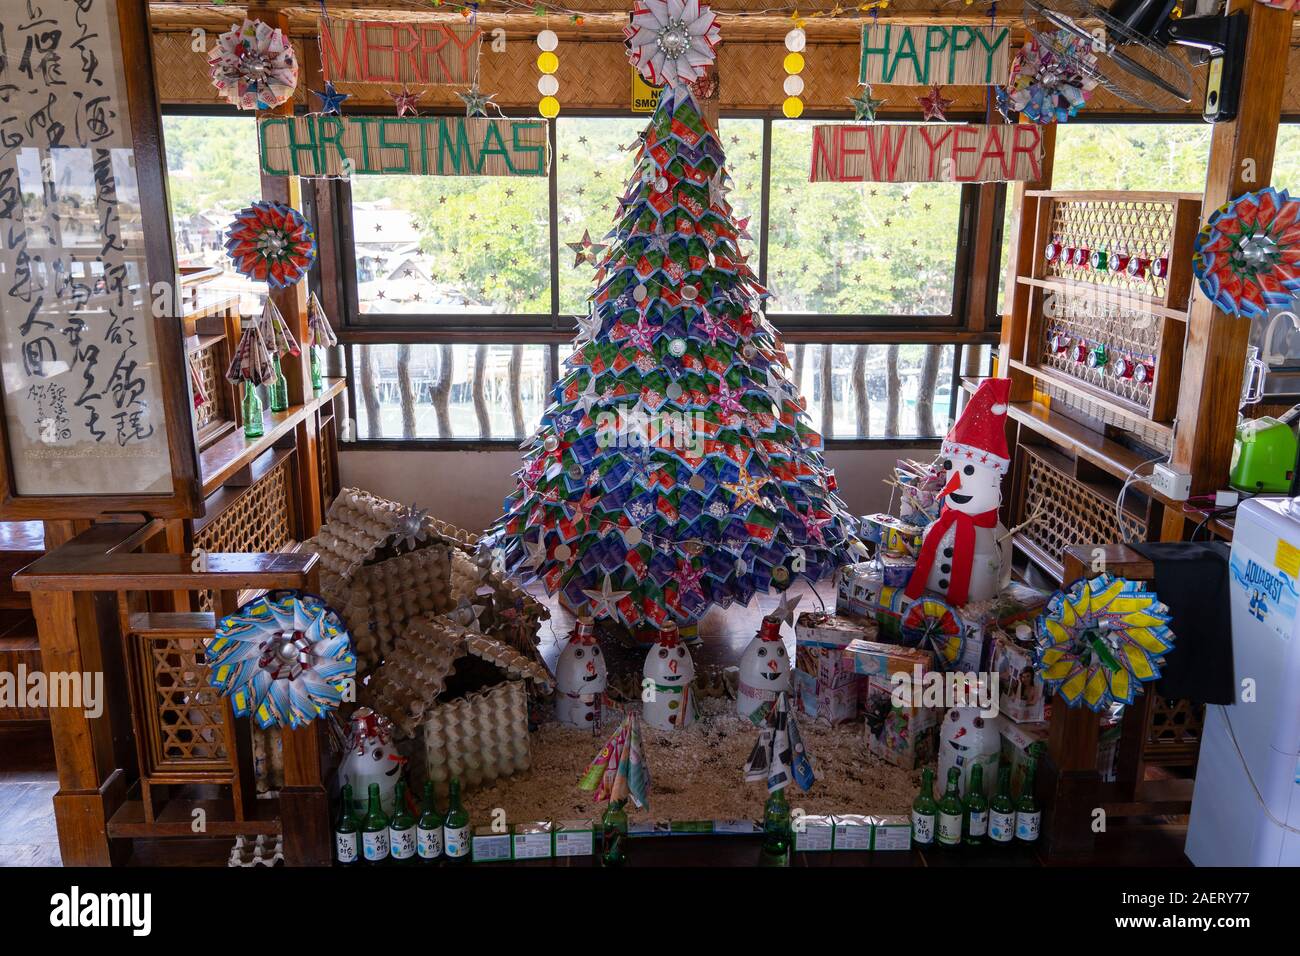 Am improvised Christmas tree made out of recycled materials, December 2019,Coron,Philippines Stock Photo